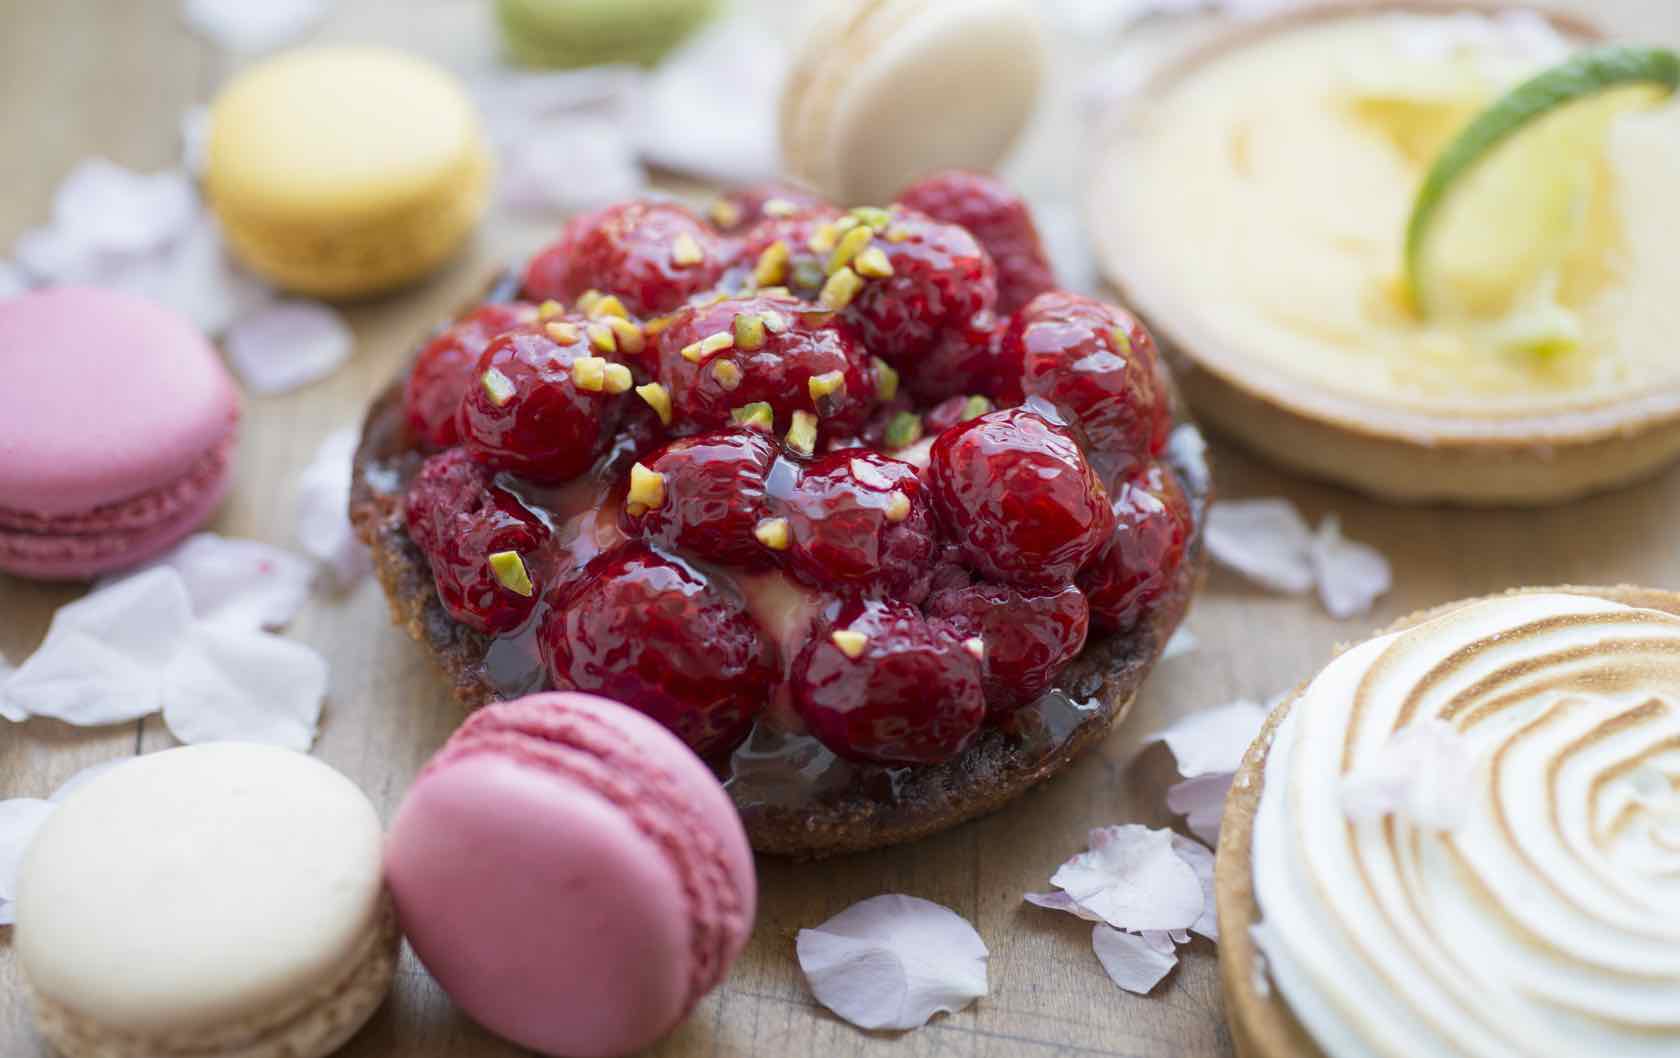 15 Places for Tasting Best French Desserts in Paris